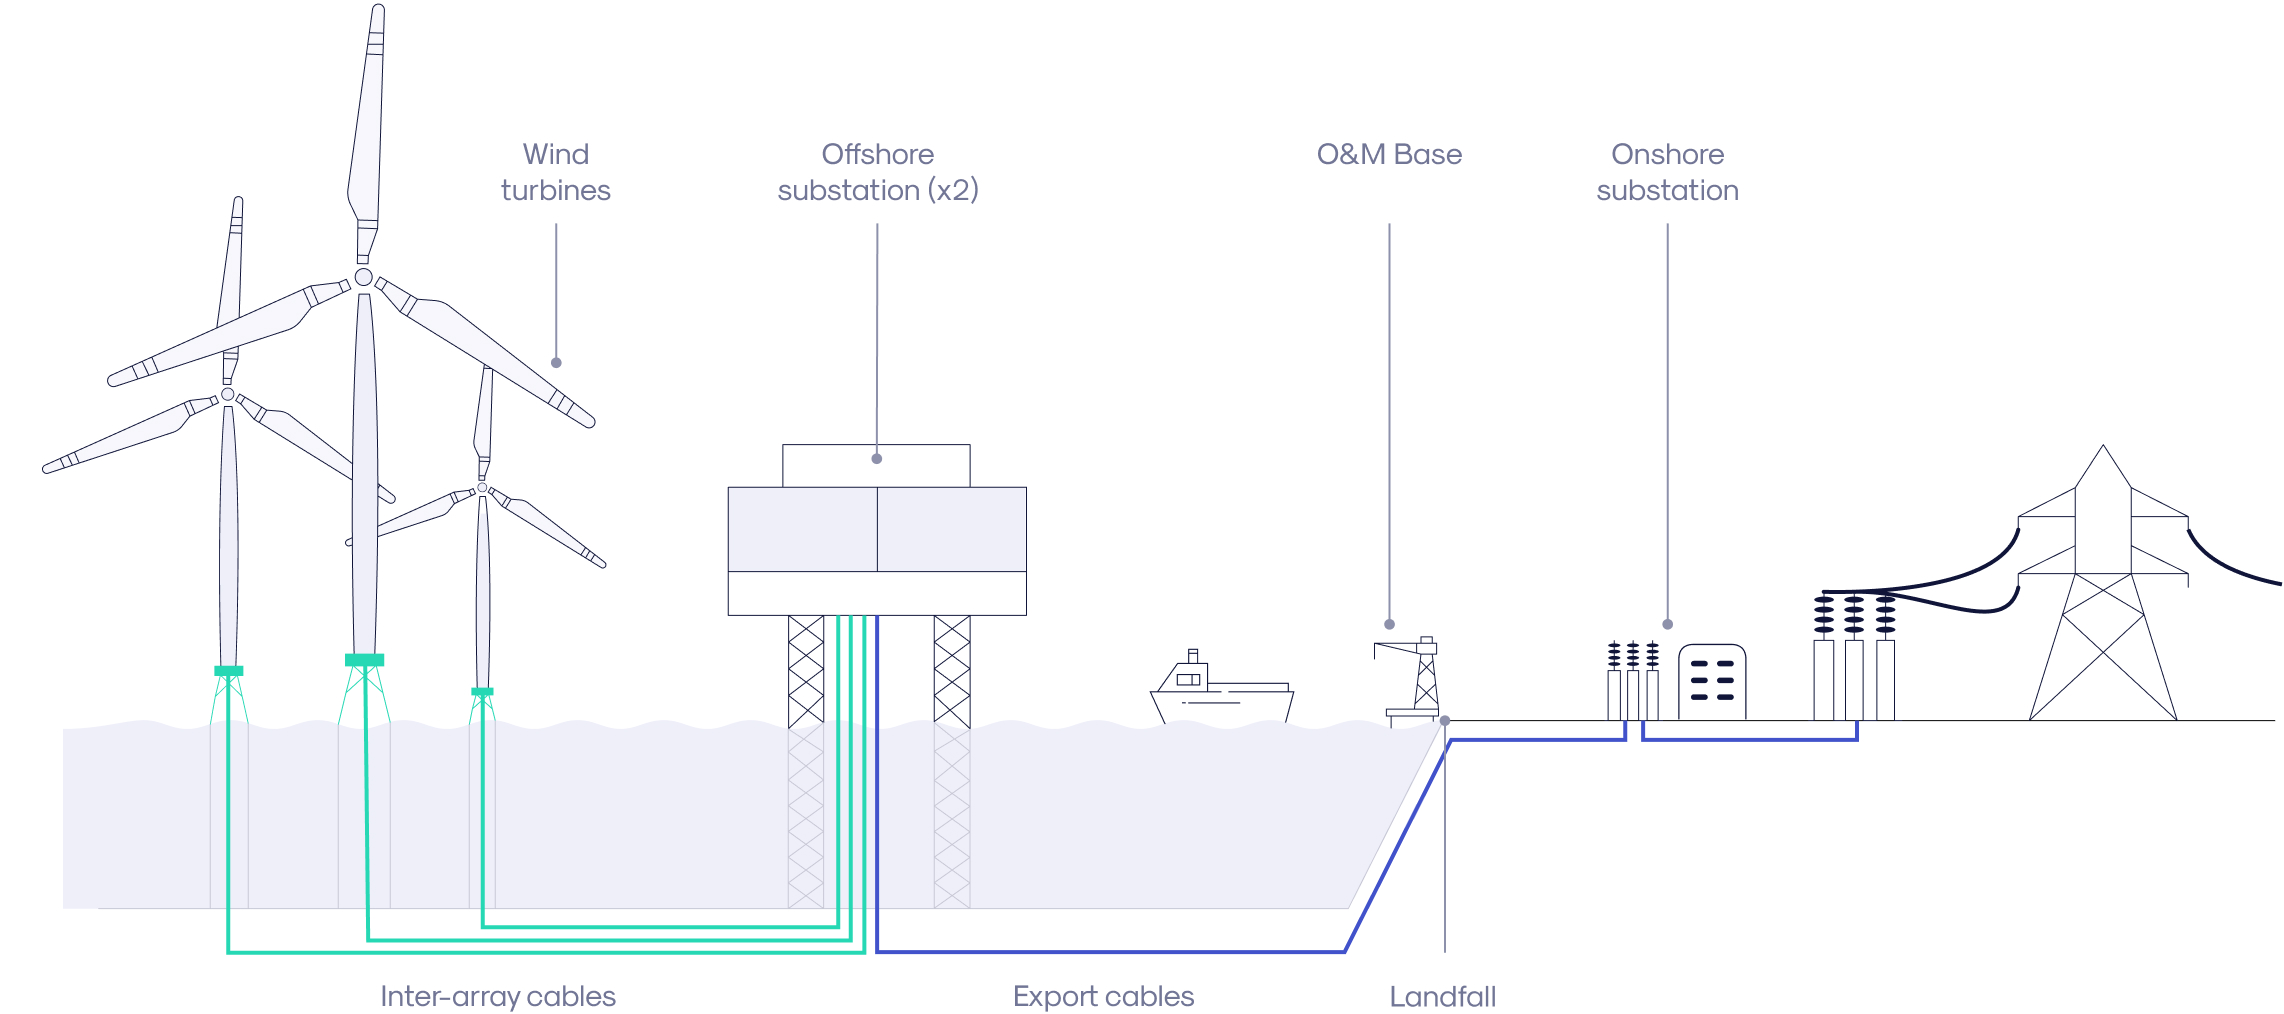 General Infrastructure of Offshore Wind Farms